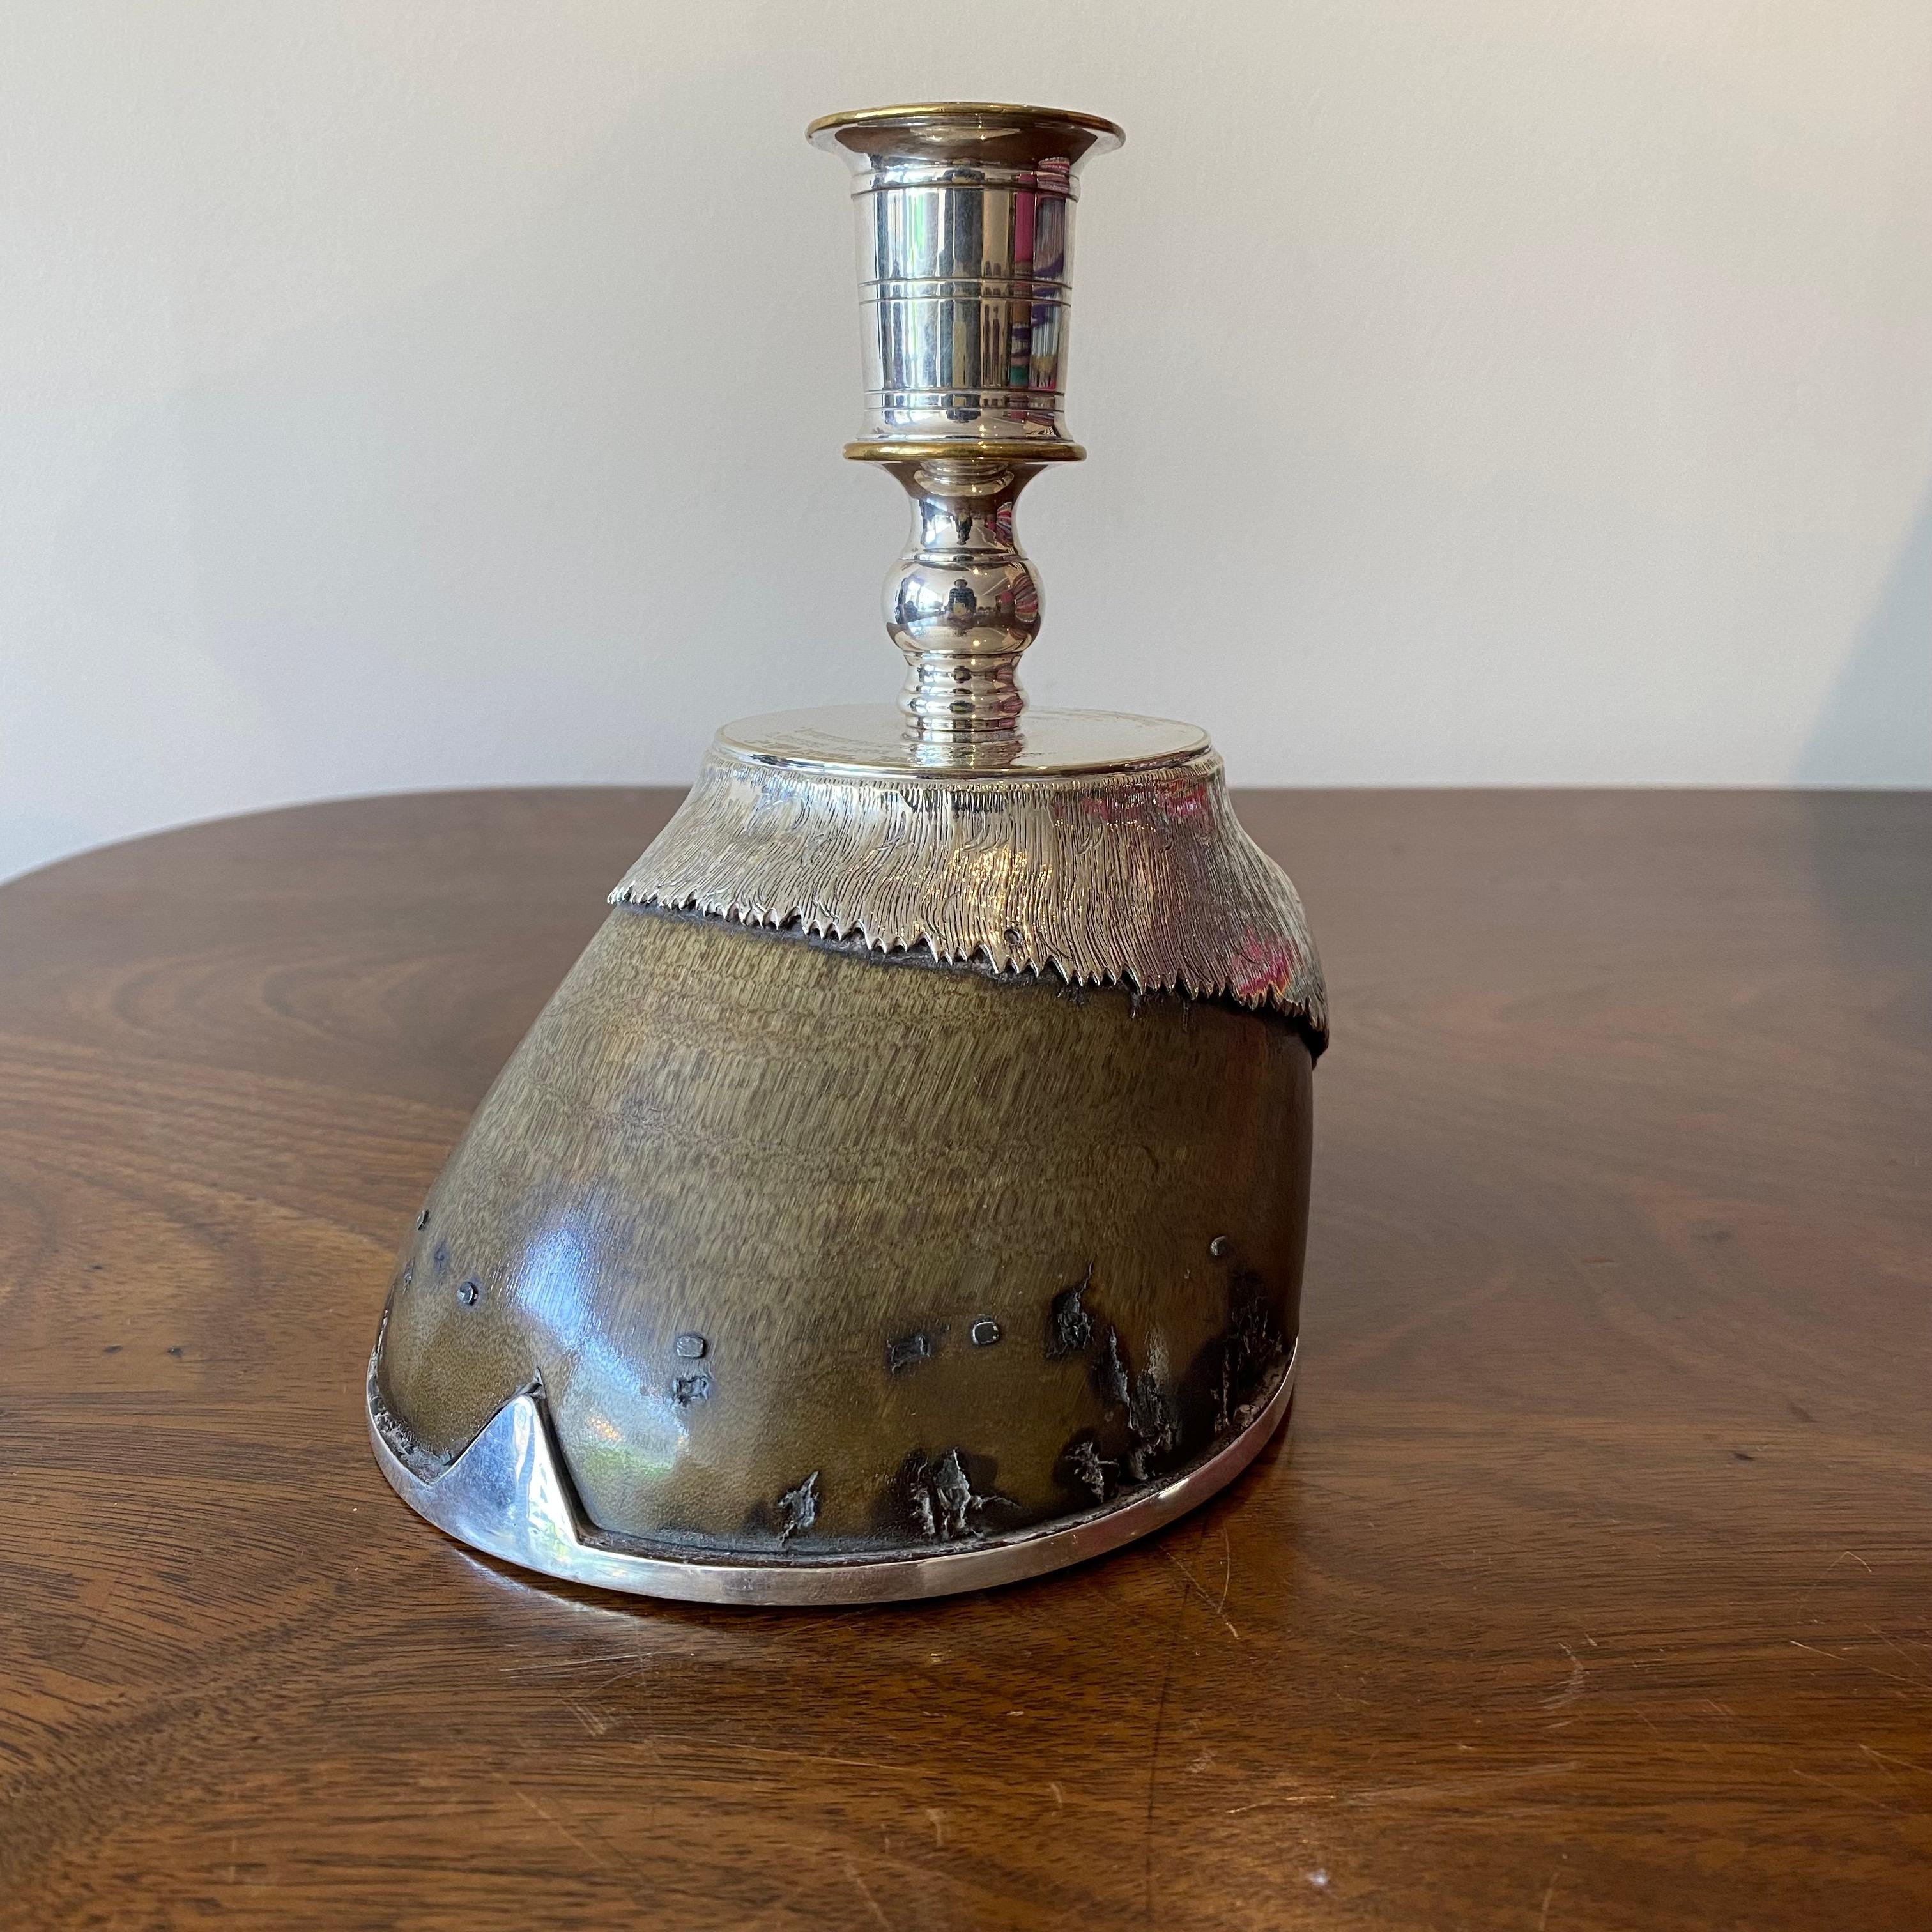 A beautiful horse hoof candlestick with silver plate embellishment. 

The piece has been mounted by Rowland Ward and has the makers stamp of 'Rowland Ward Limited, 166 Piccadilly' to the horse shoe.

The upper section has the following